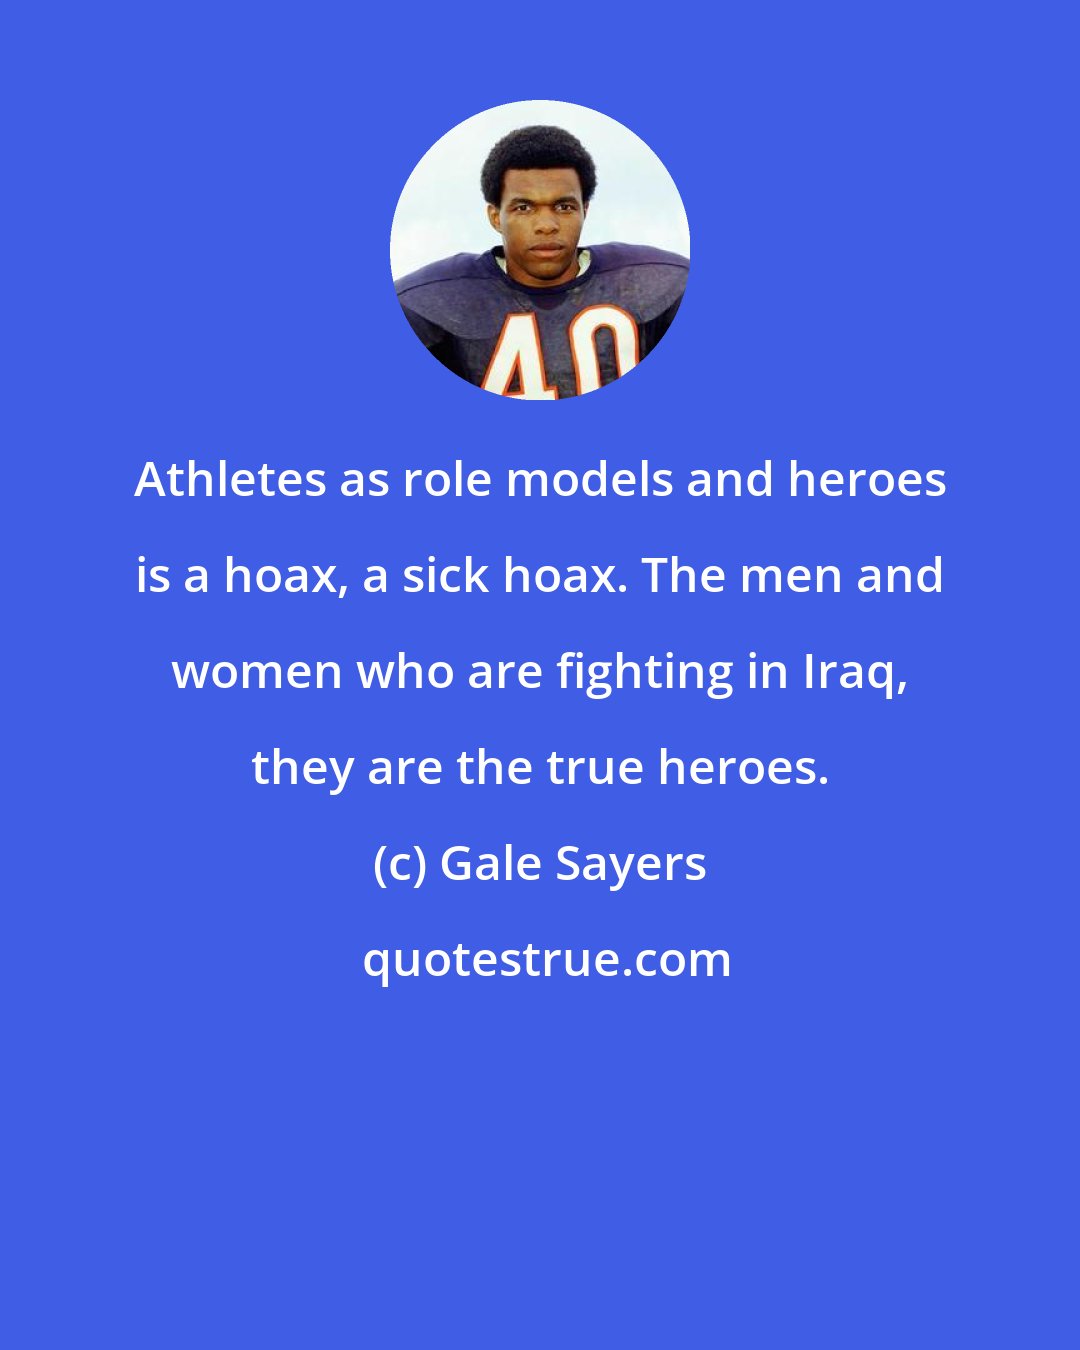 Gale Sayers: Athletes as role models and heroes is a hoax, a sick hoax. The men and women who are fighting in Iraq, they are the true heroes.